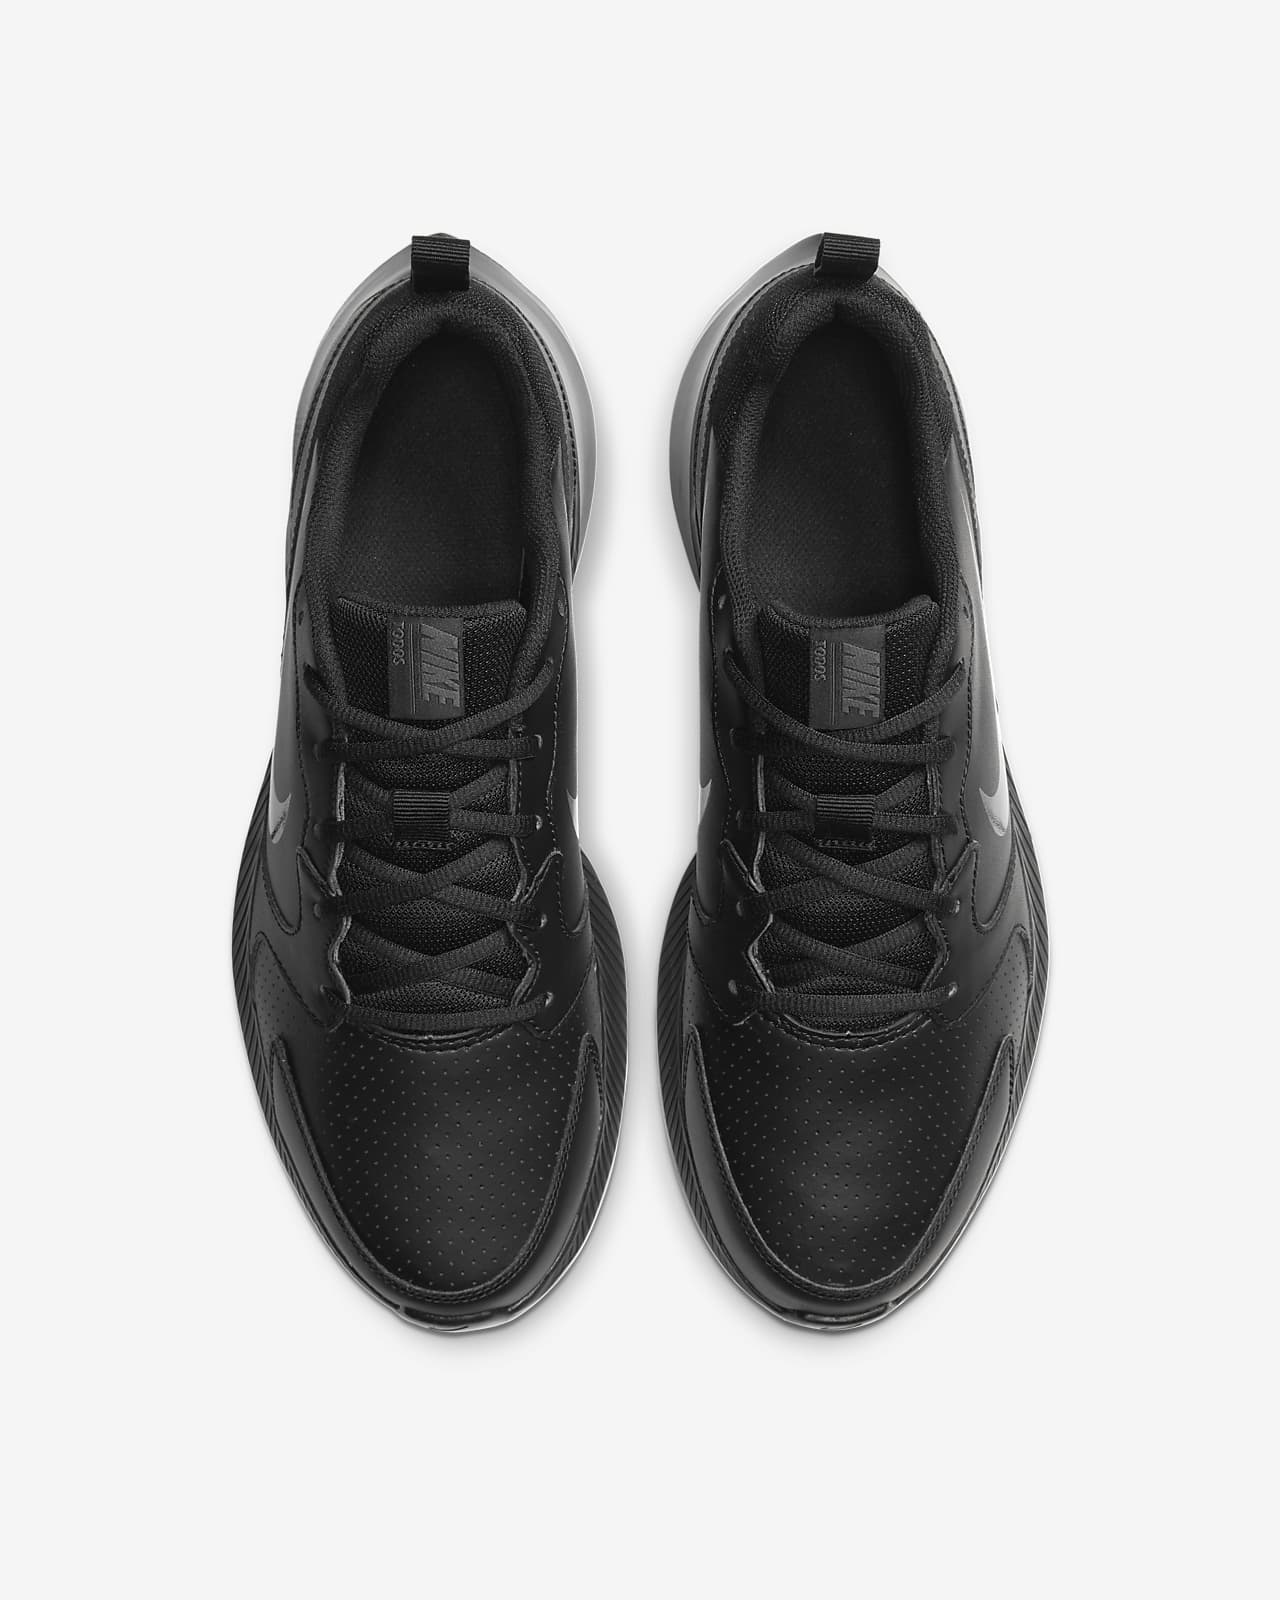 all black leather nike shoes